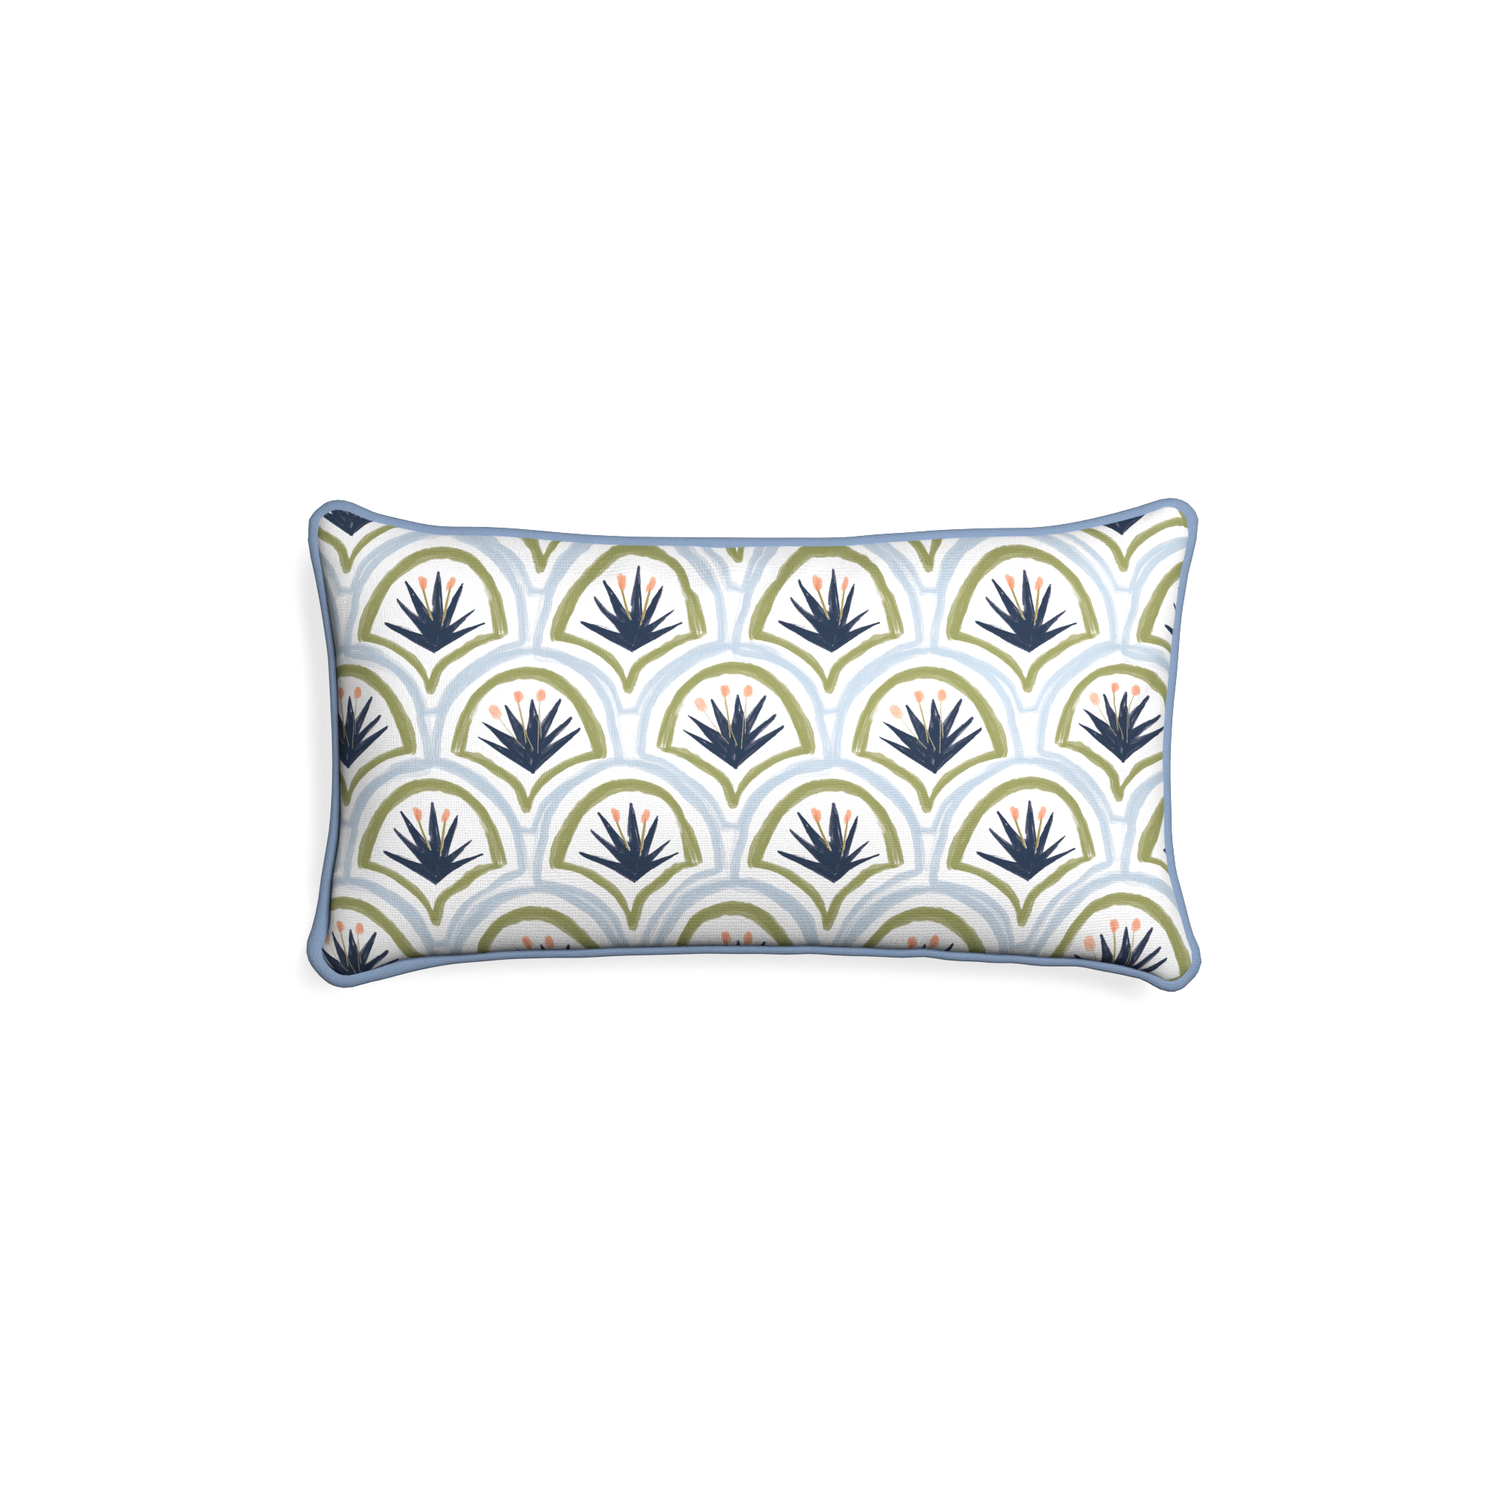 Petite-lumbar thatcher midnight custom art deco palm patternpillow with sky piping on white background